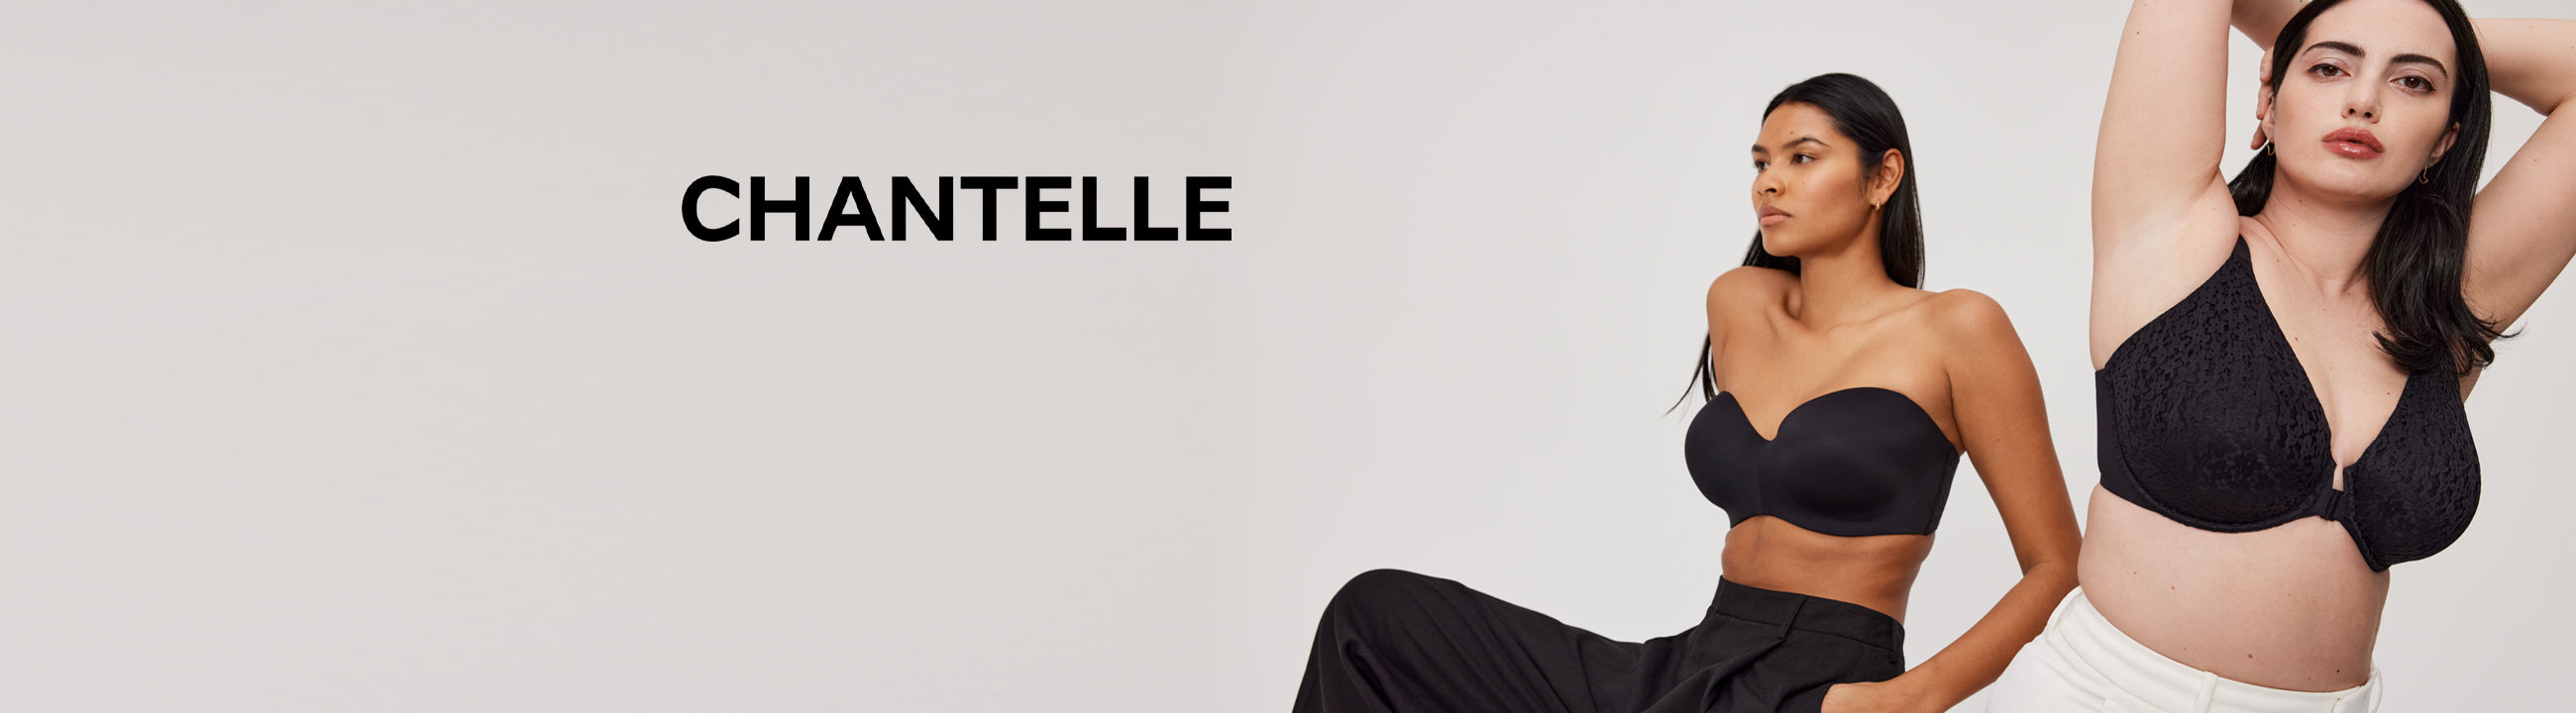 Best place to buy lingerie 2014, Aristelle